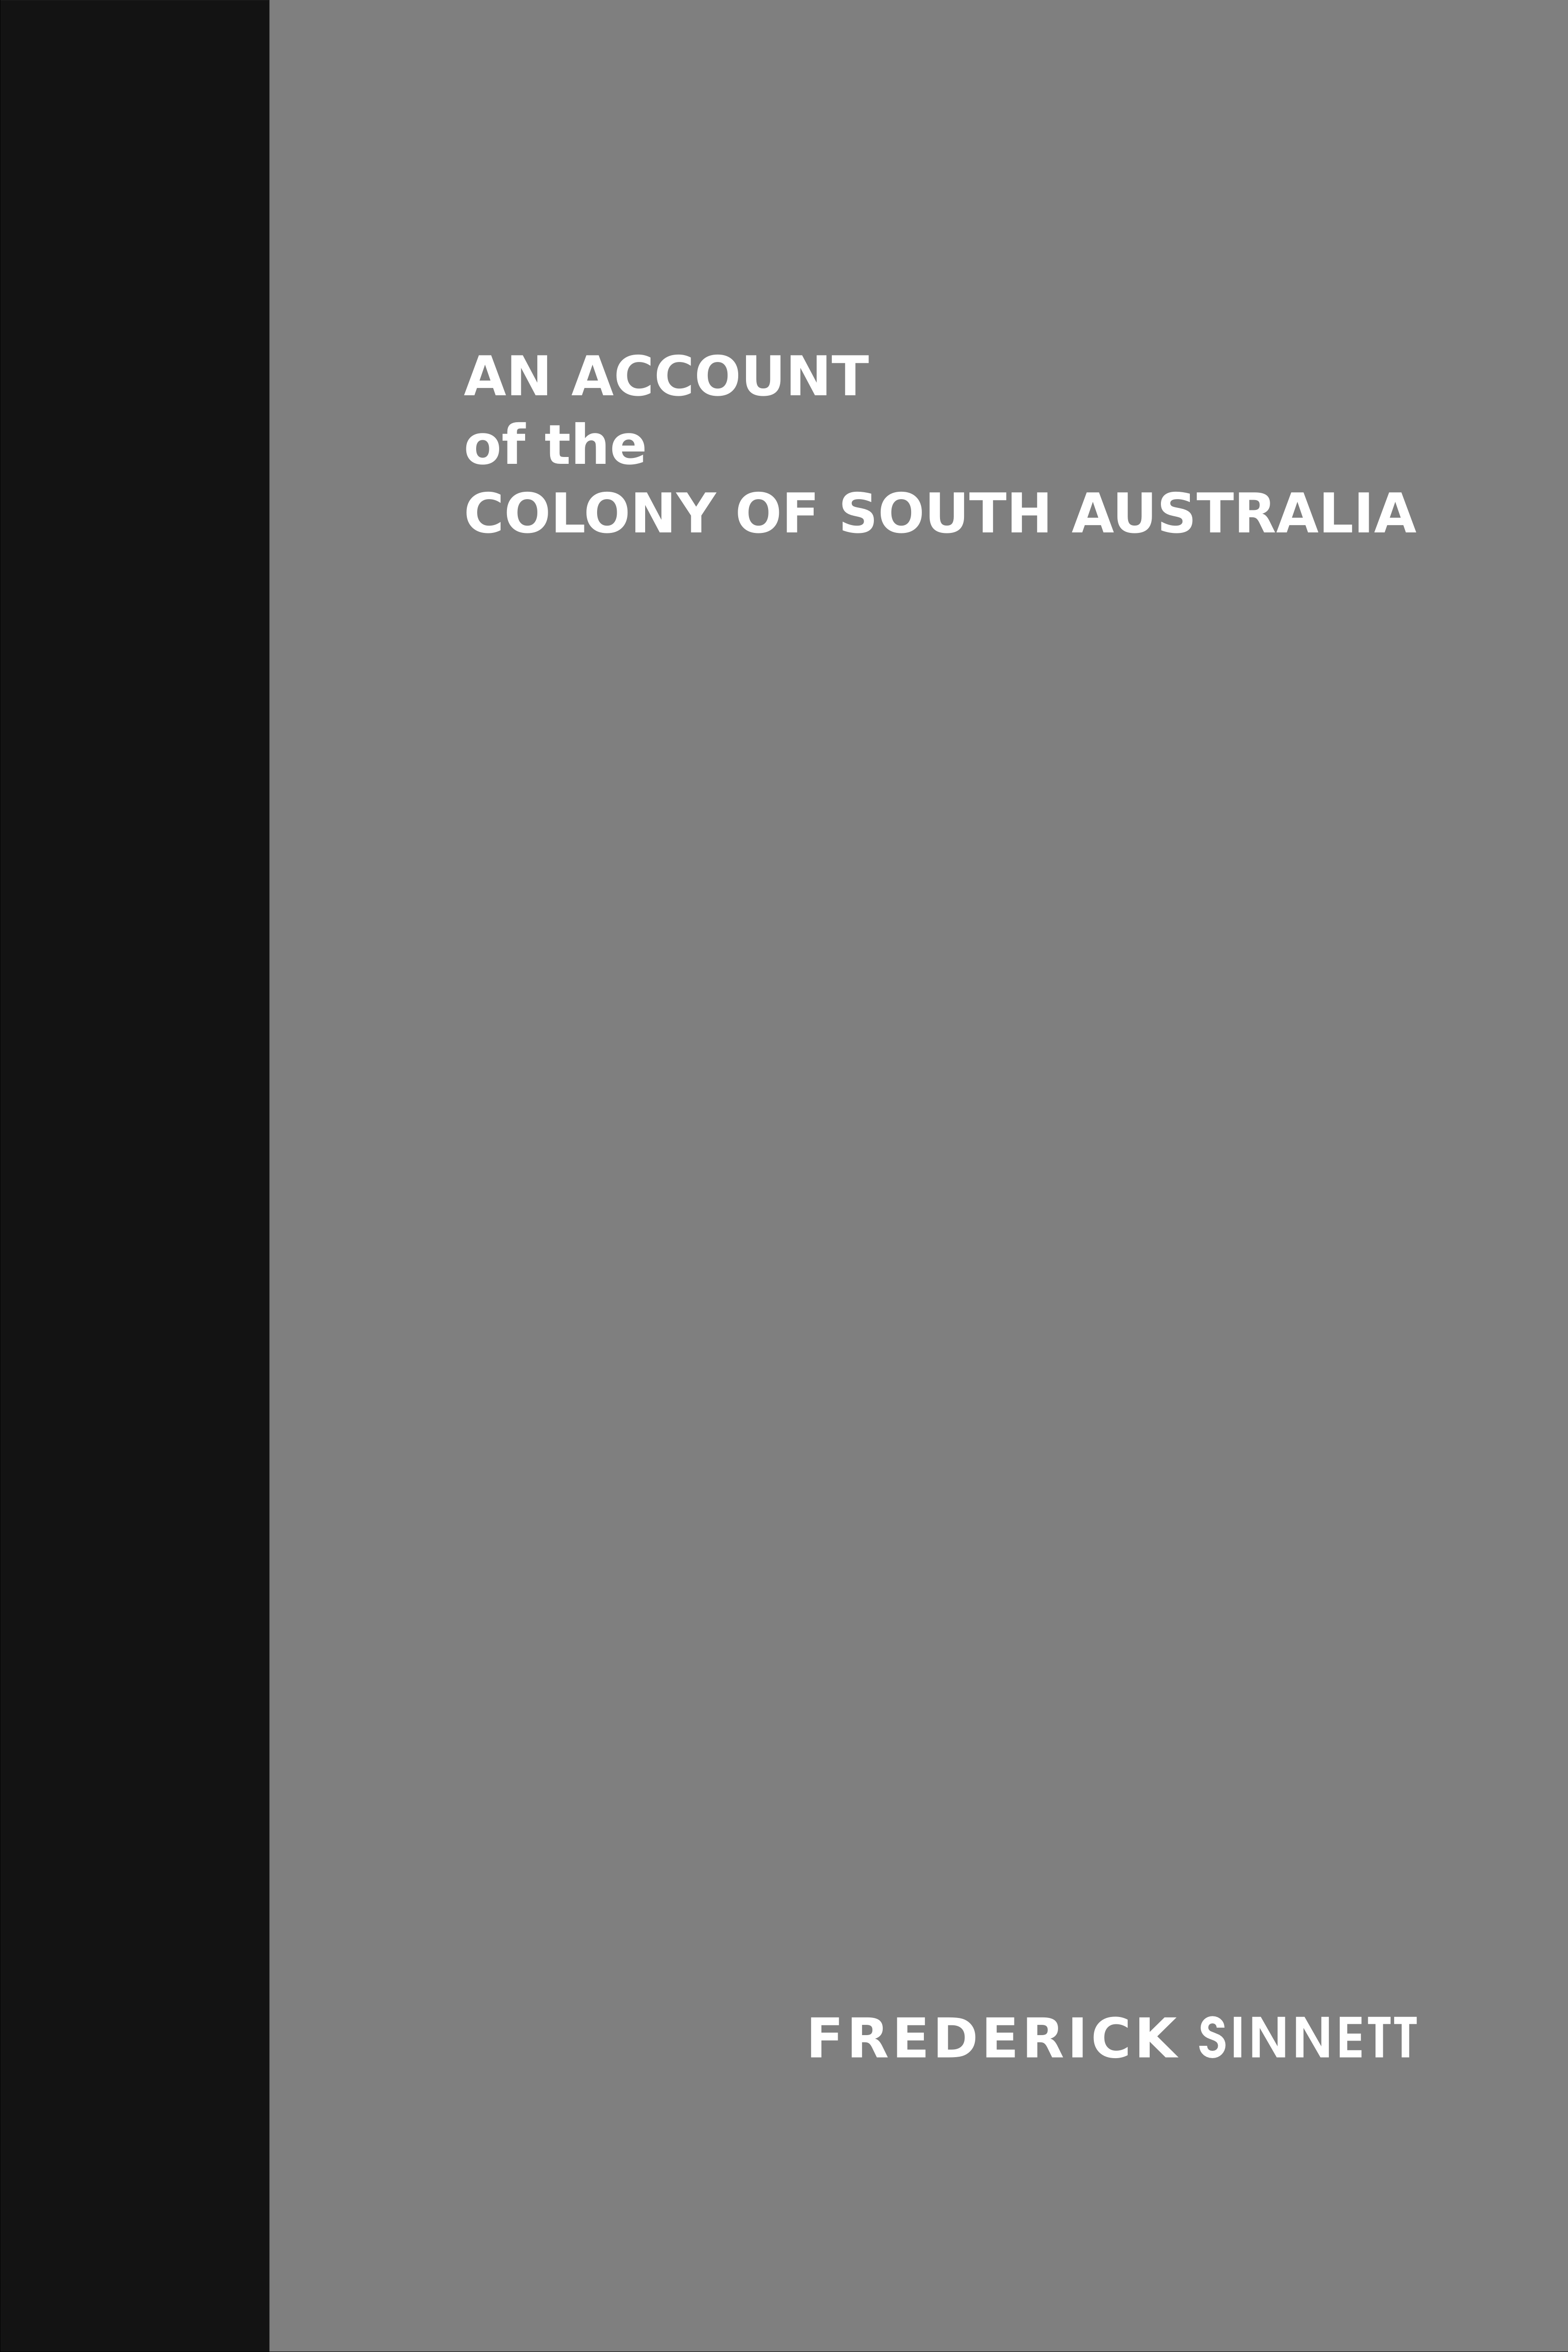 An Account of the Colony of South Australia